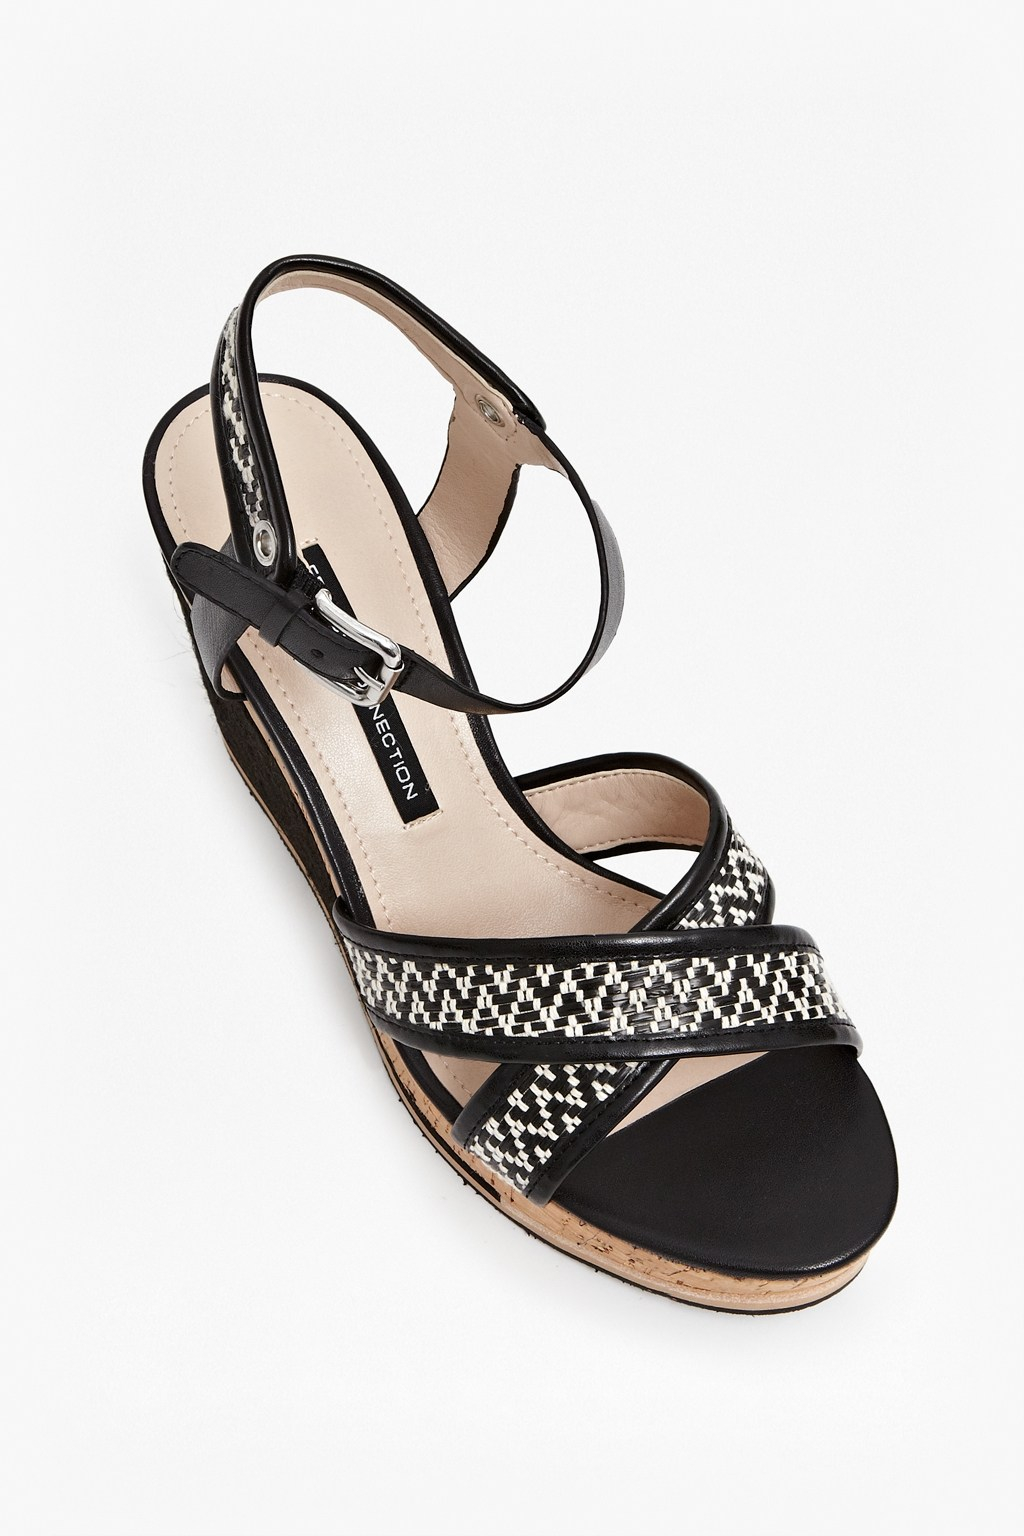 French connection Lata Wedges Heels Sandals in Black | Lyst